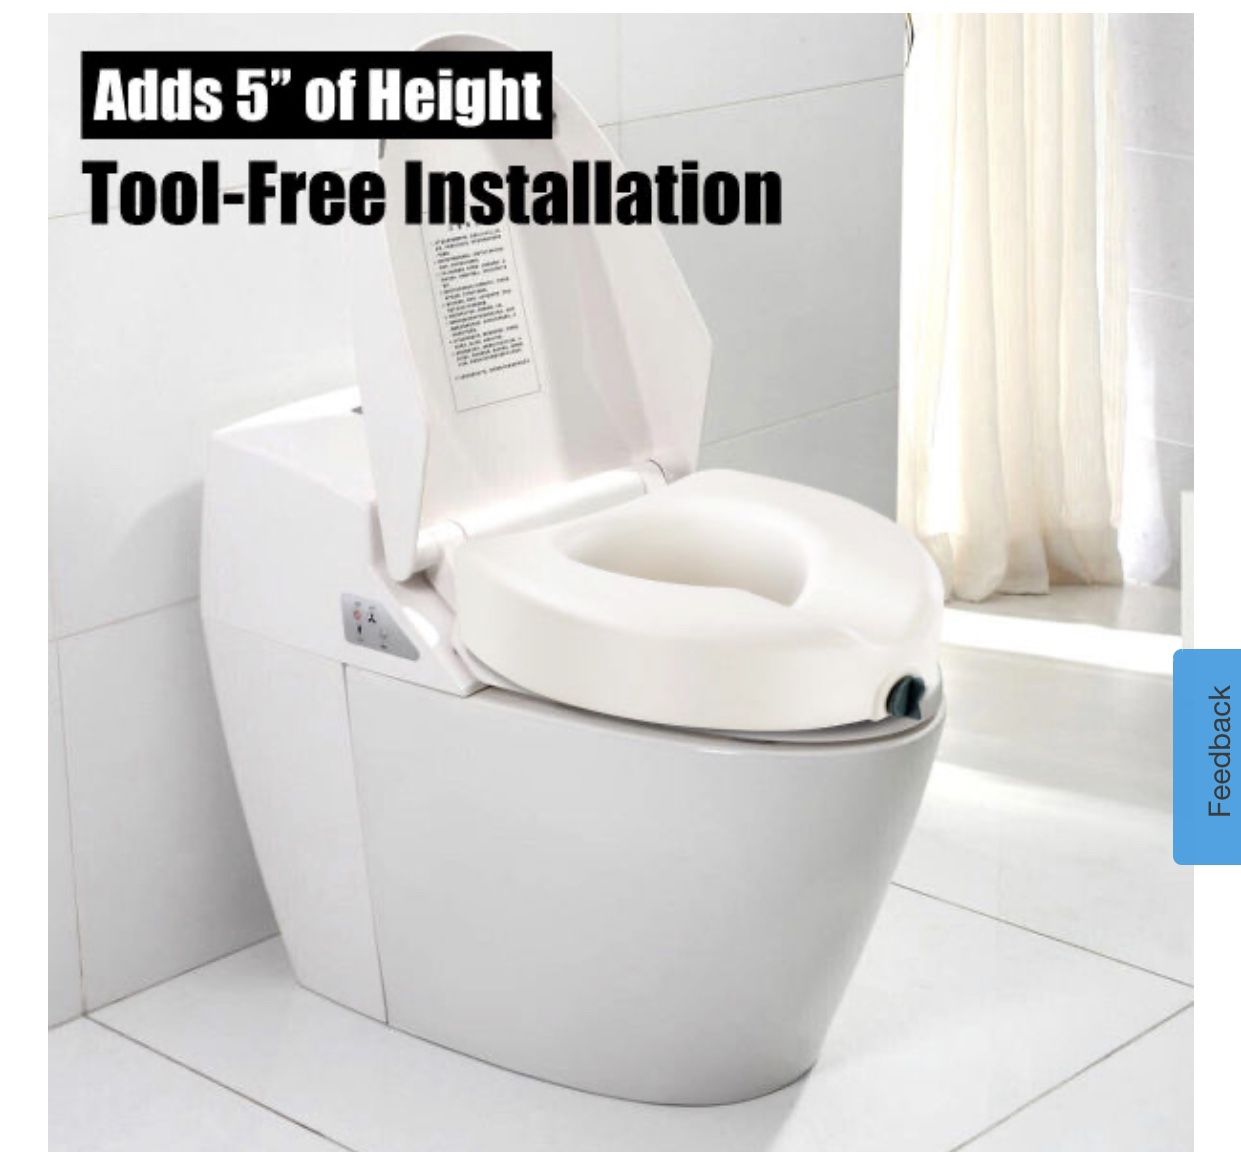 5'' Elevated Raised Toilet Seat Safety Locking Medical Aid for Elderly Disabled